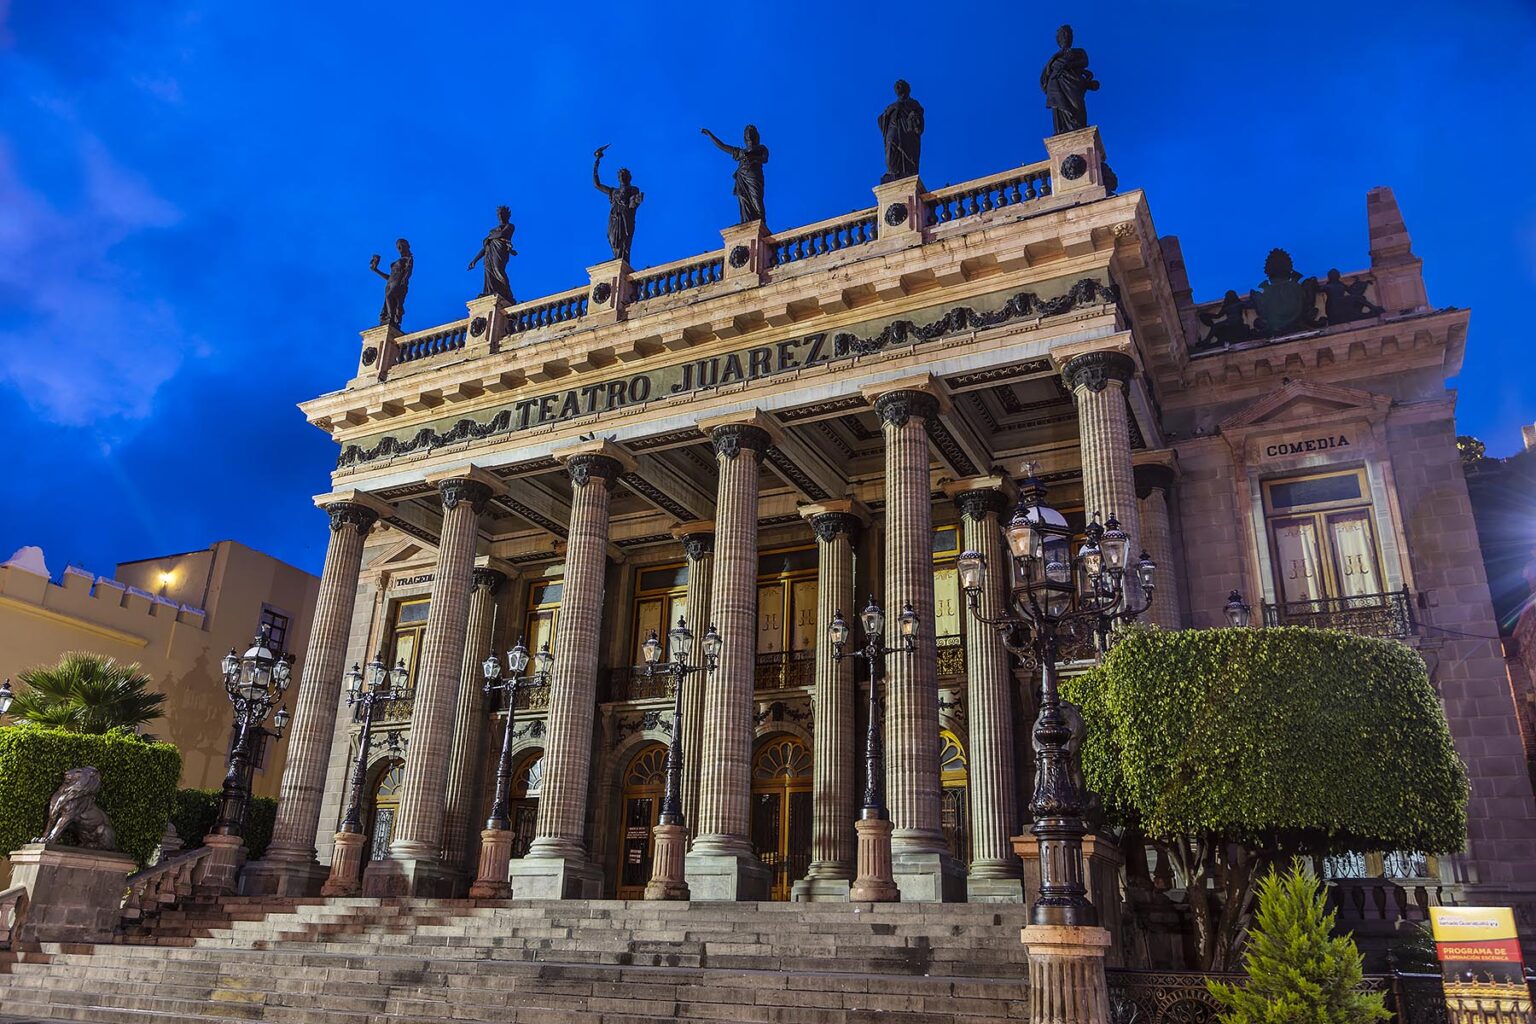 The JUAREZ THEATER is one of the finest in Mexico - GUANAJUATO, MEXICO